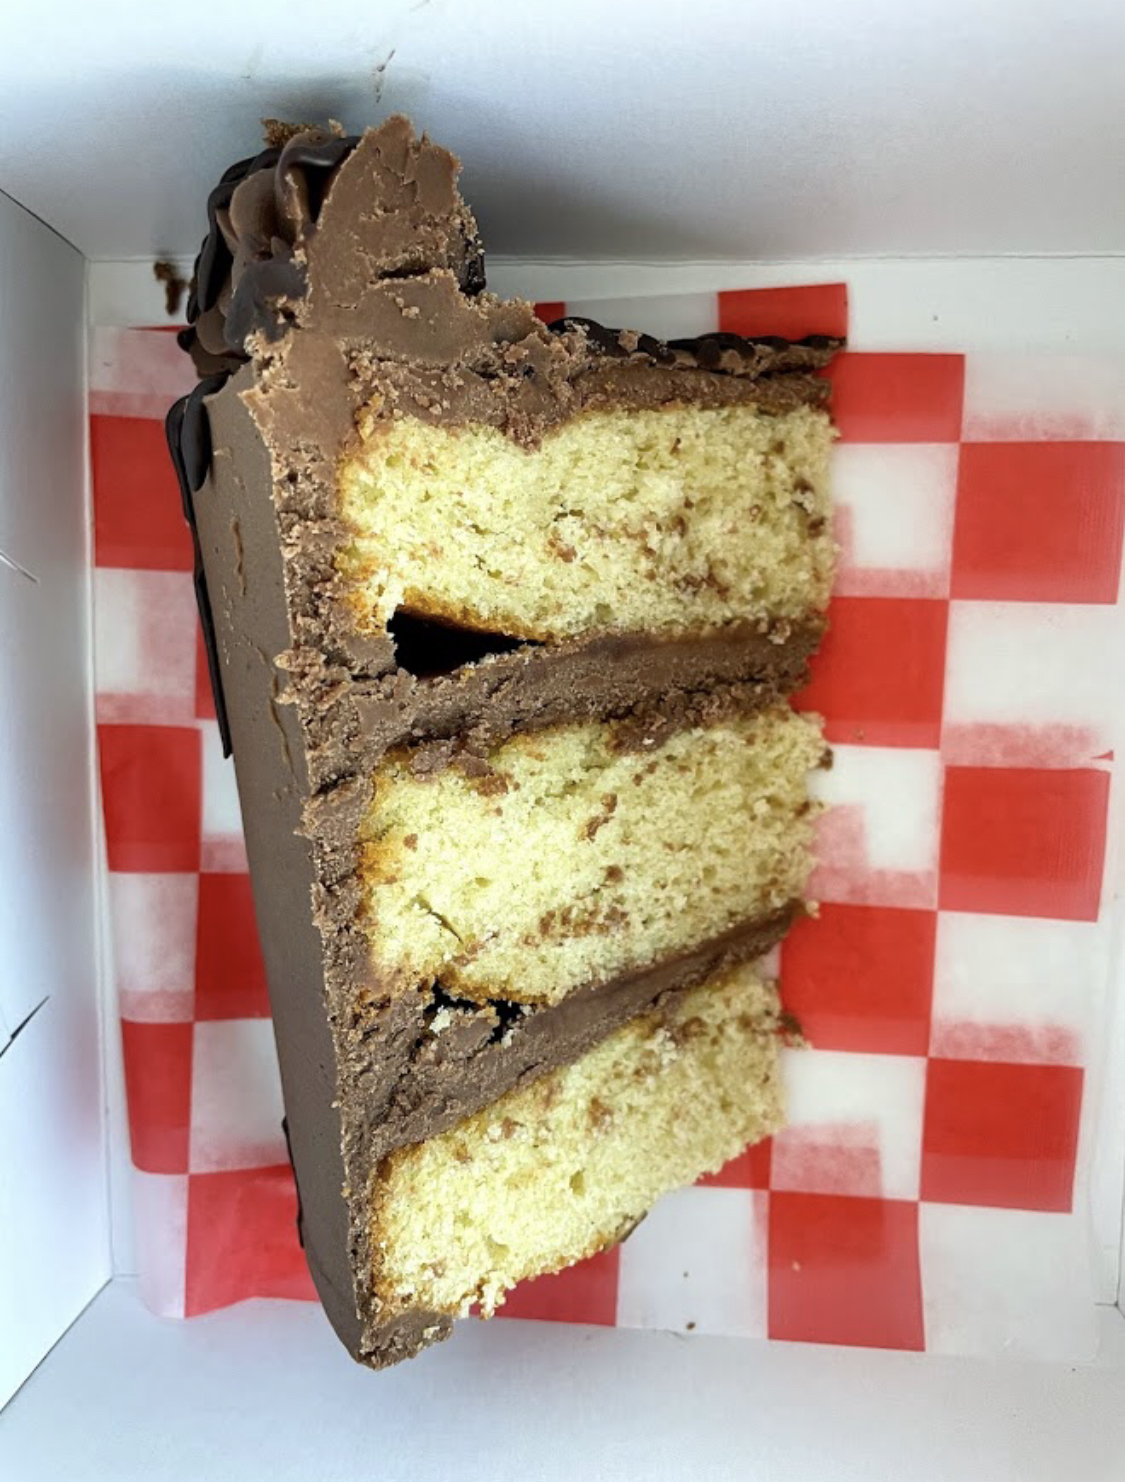 A three layer vanilla cake with light chocolate frosting sits in a white box on red and white checkered parchment paper. Photo by Remington Rock.